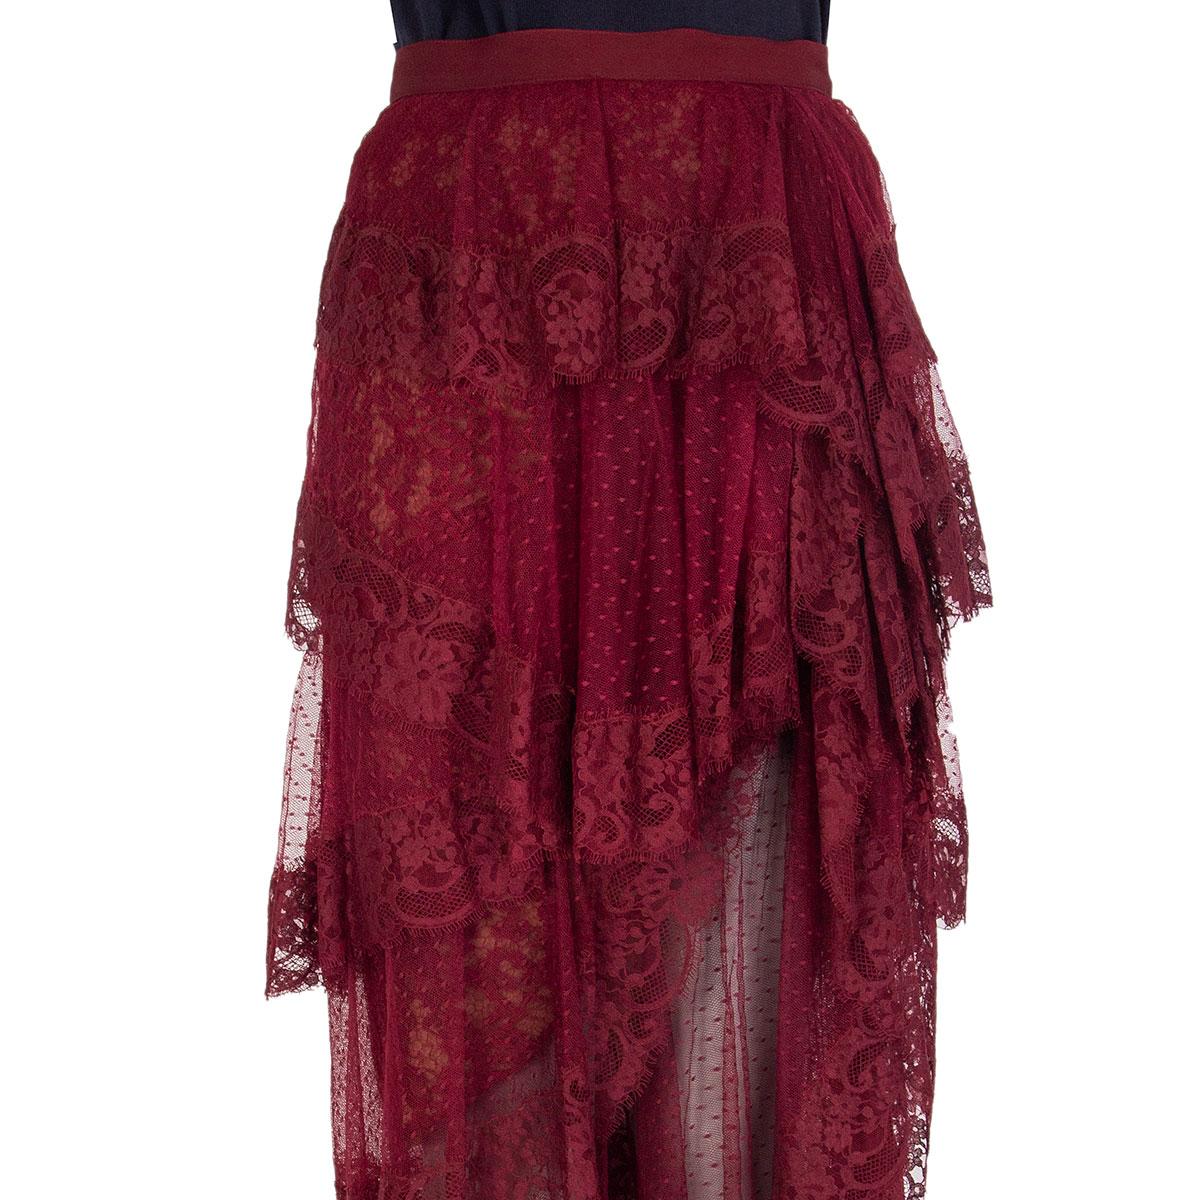 100% authentic Elie Saab tiered chantilly lace midi skirt in burgundy cotton (56%), nylon (23%) and polyamid (21%). Made from layers of lace and Swiss-dot tulle, this semi-sheer piece is lined through the mid-thigh and falls to an asymmetric